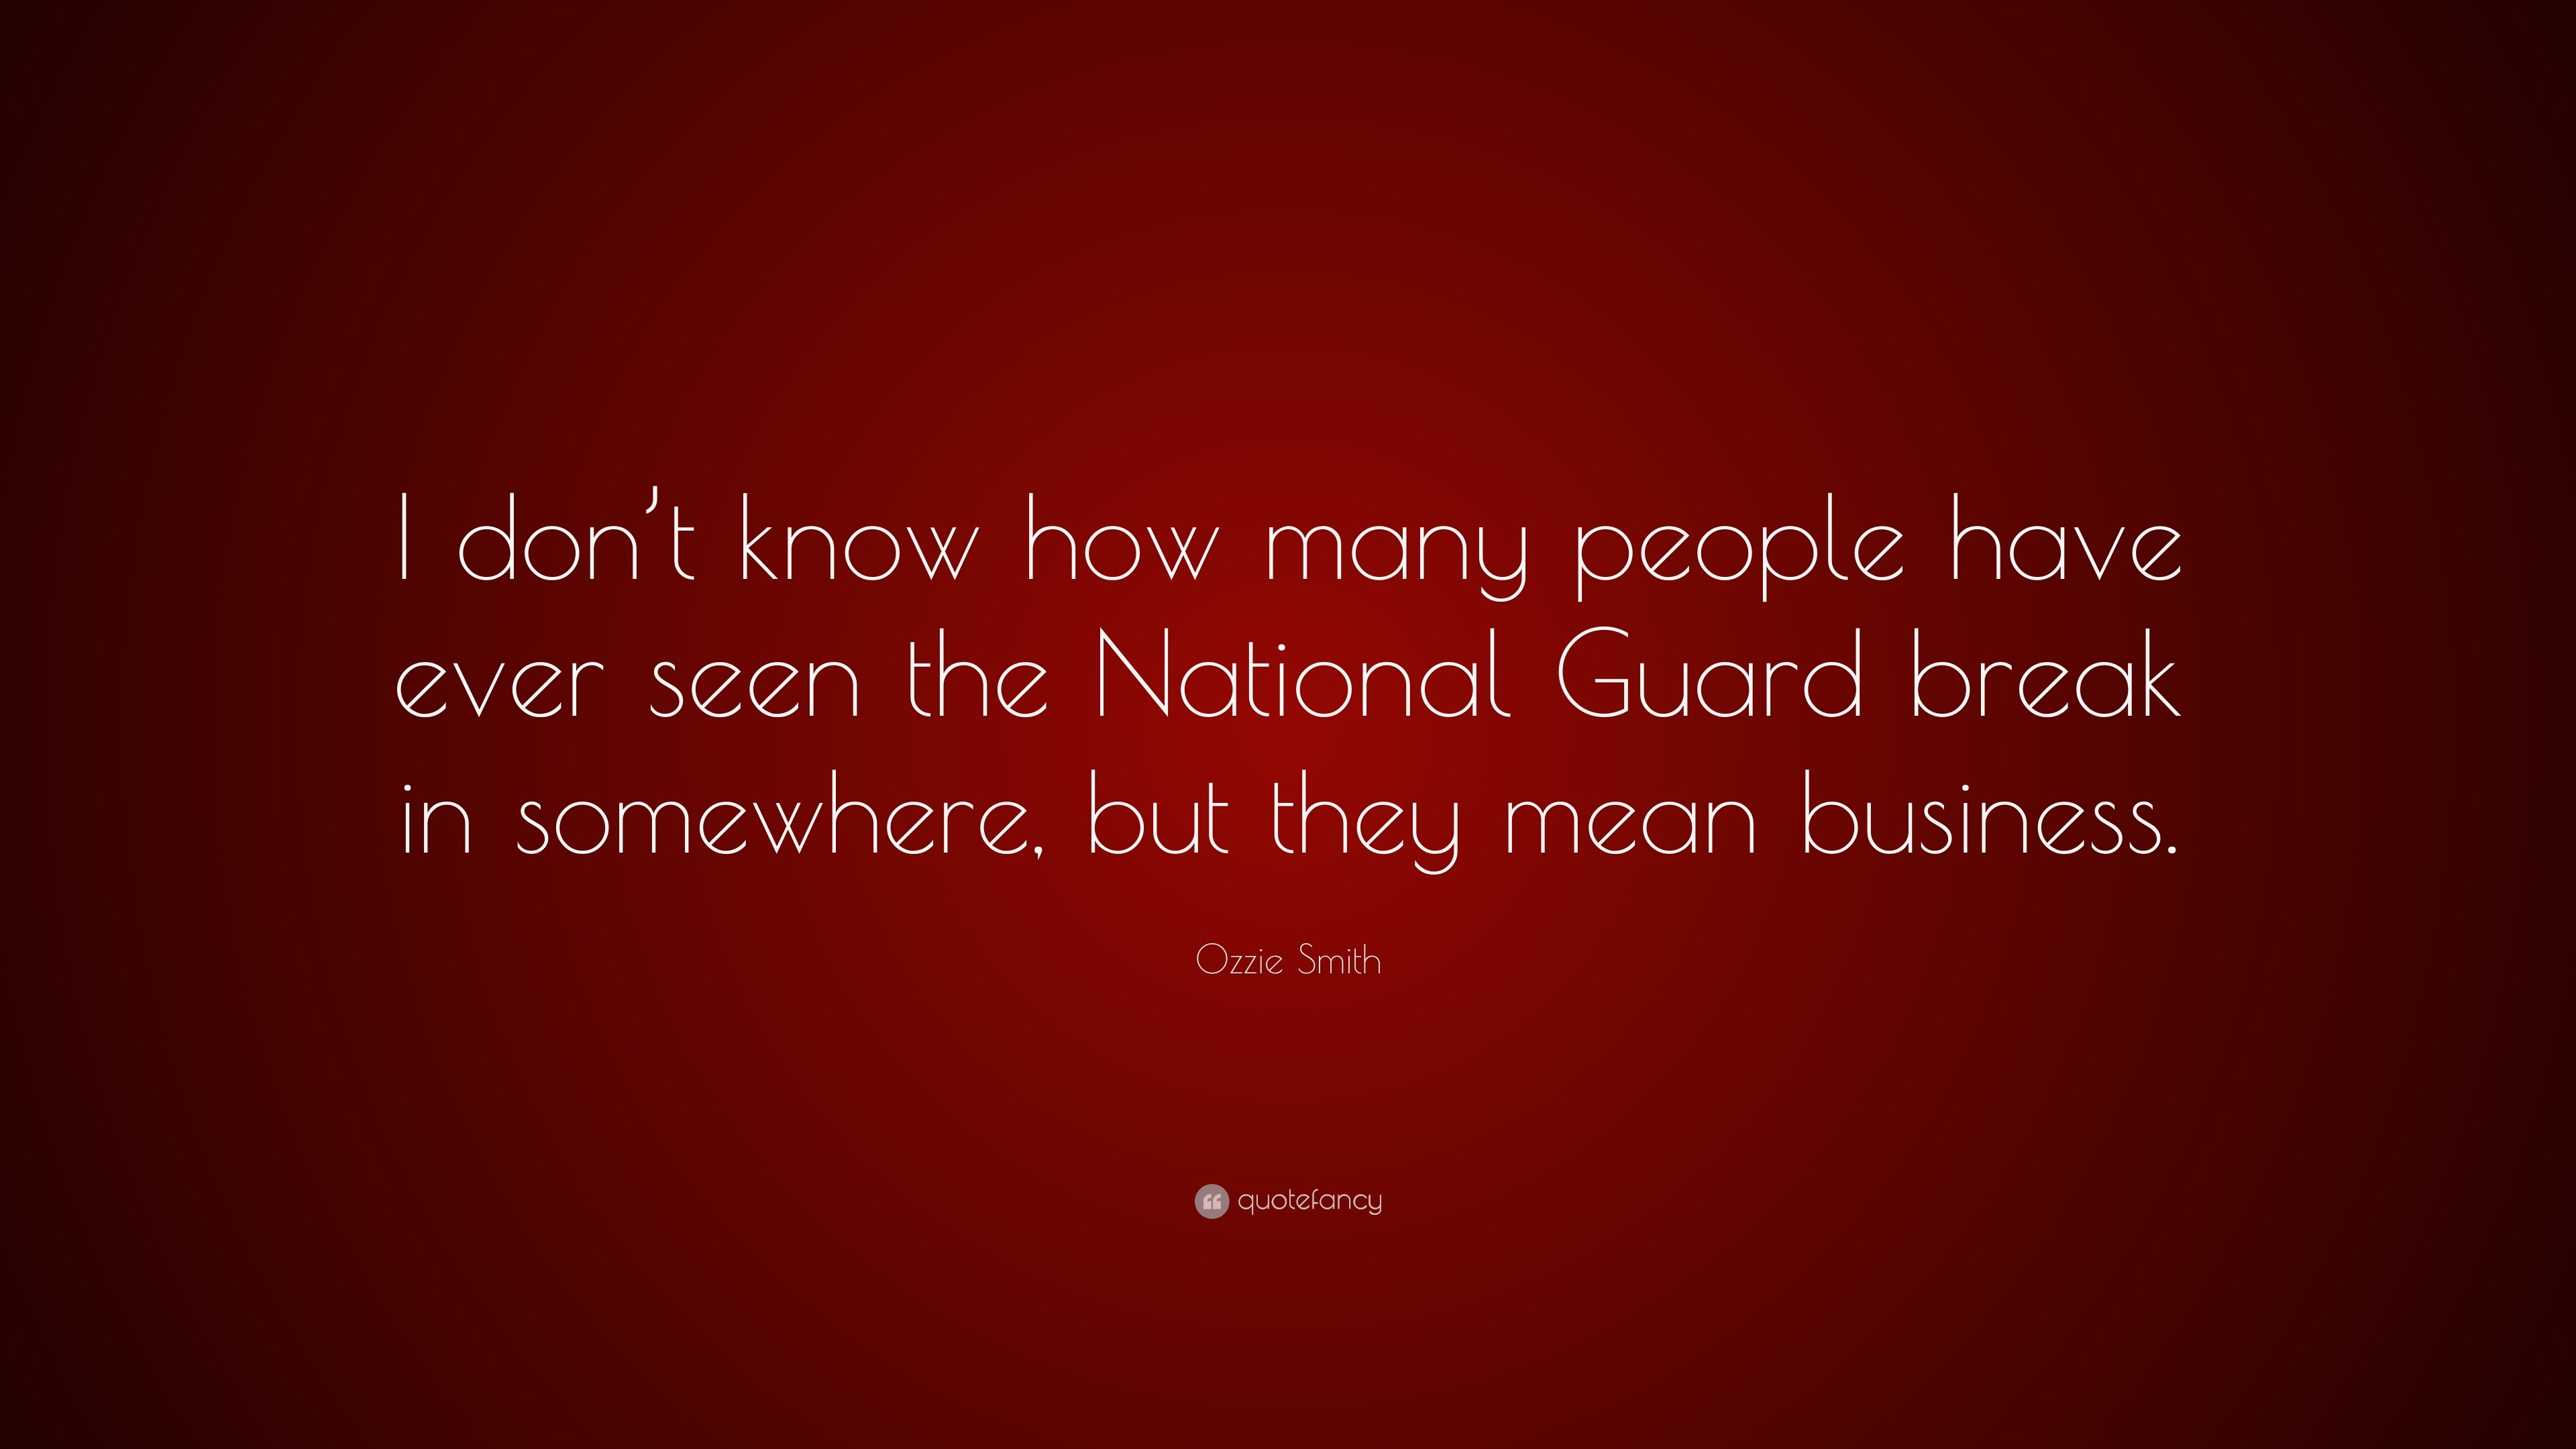 3840x2160 Ozzie Smith Quote: “I don't know how many people have ever seen